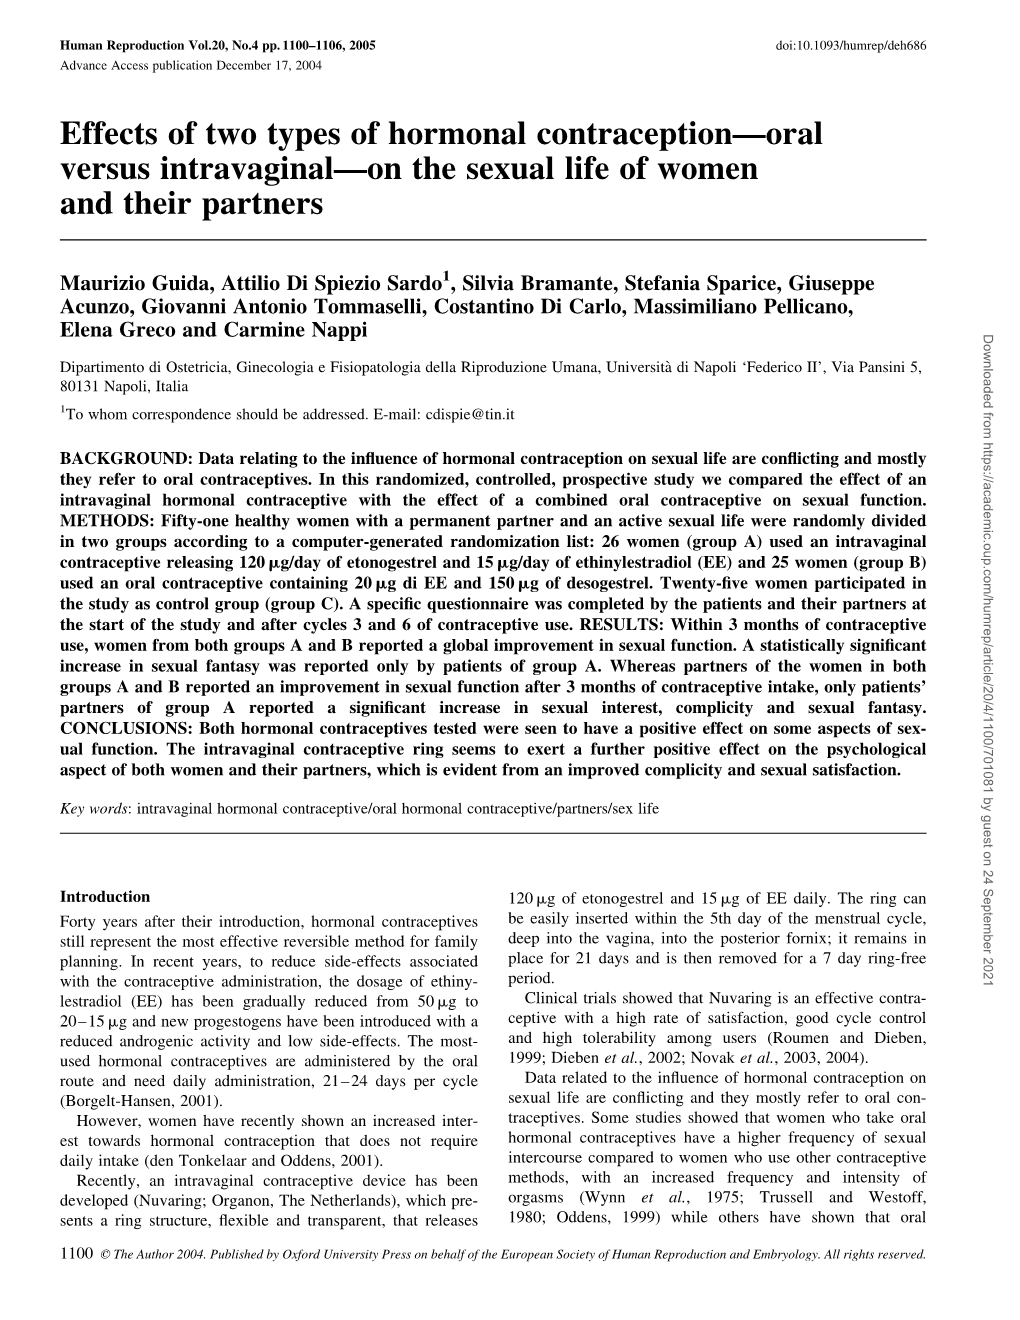 Effects of Two Types of Hormonal Contraception—Oral Versus Intravaginal—On the Sexual Life of Women and Their Partners